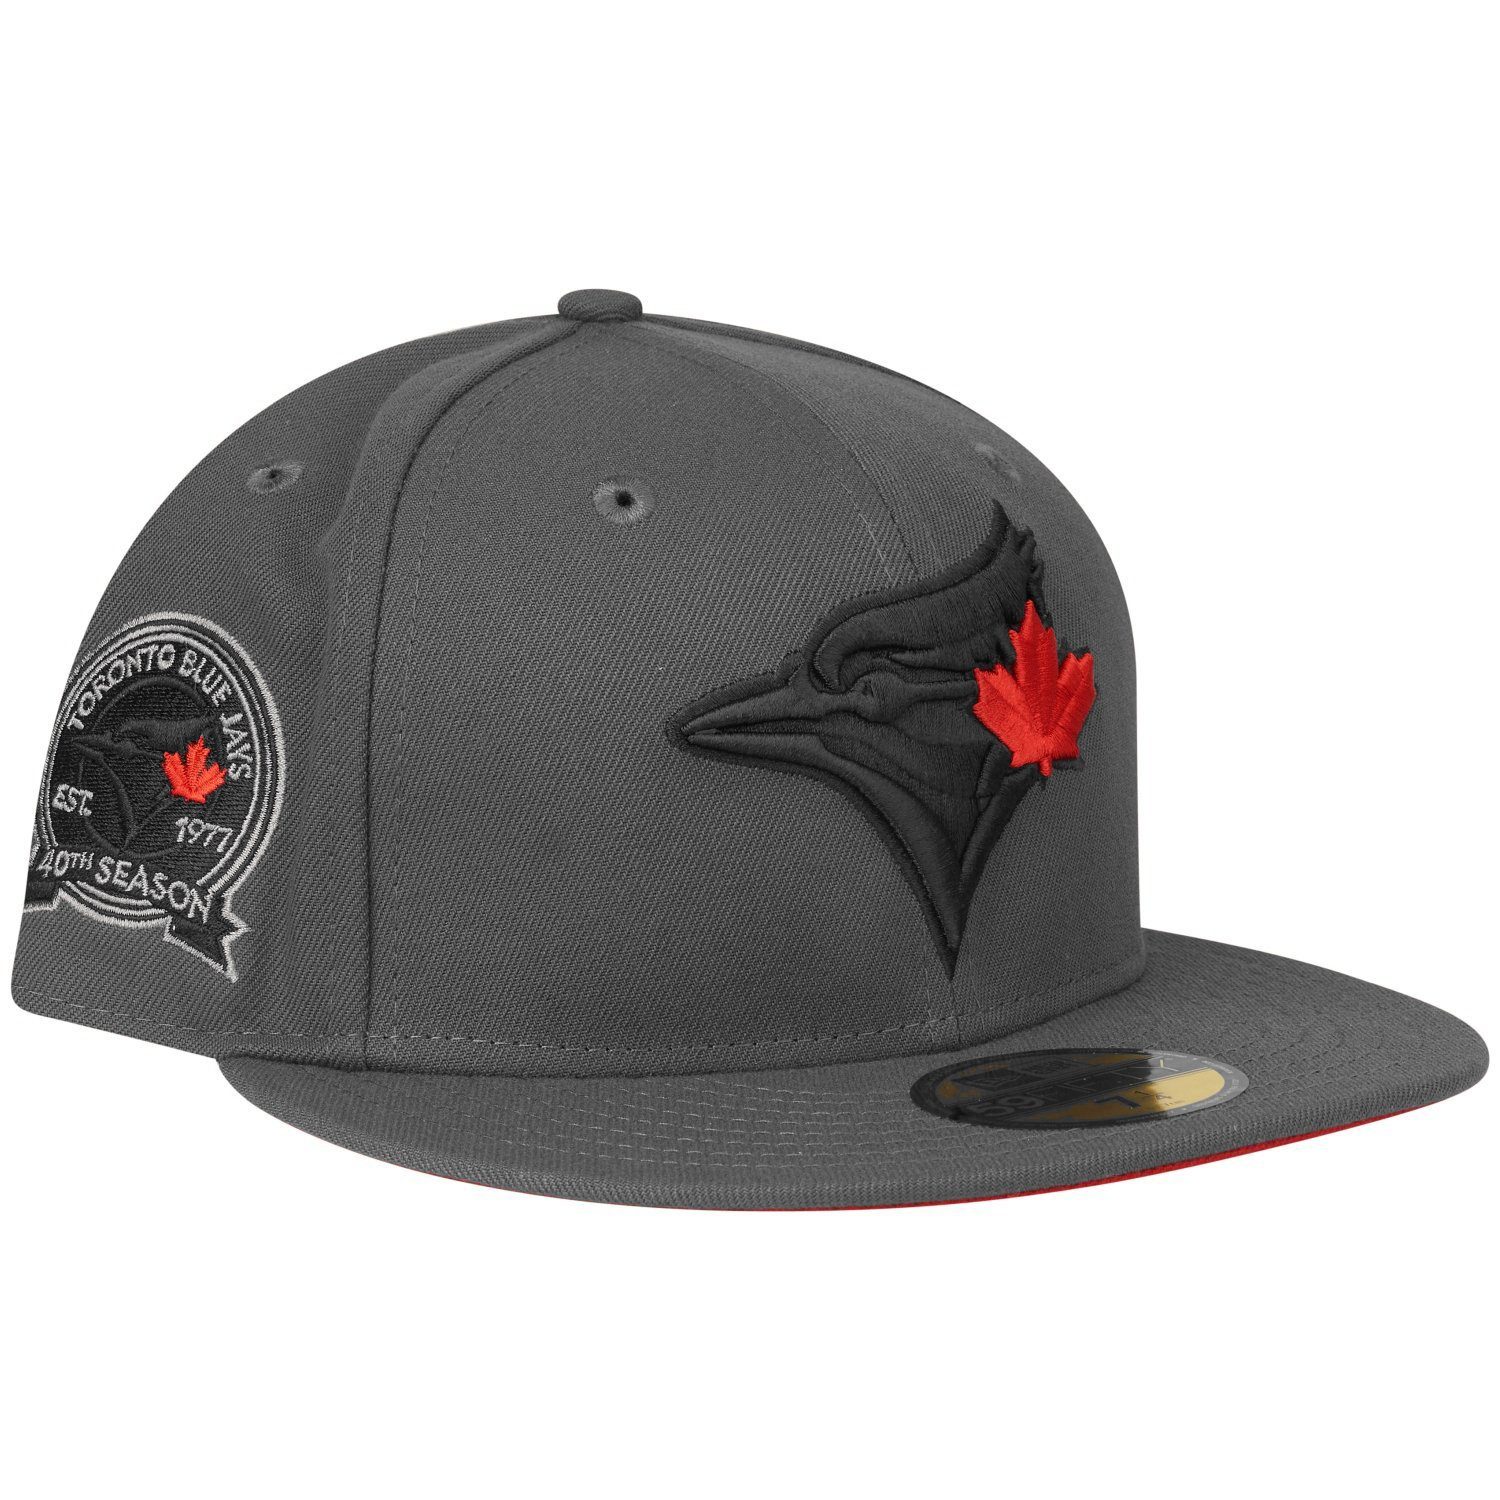 New Era Fitted Cap 59Fifty MLB Toronto Jays 40th